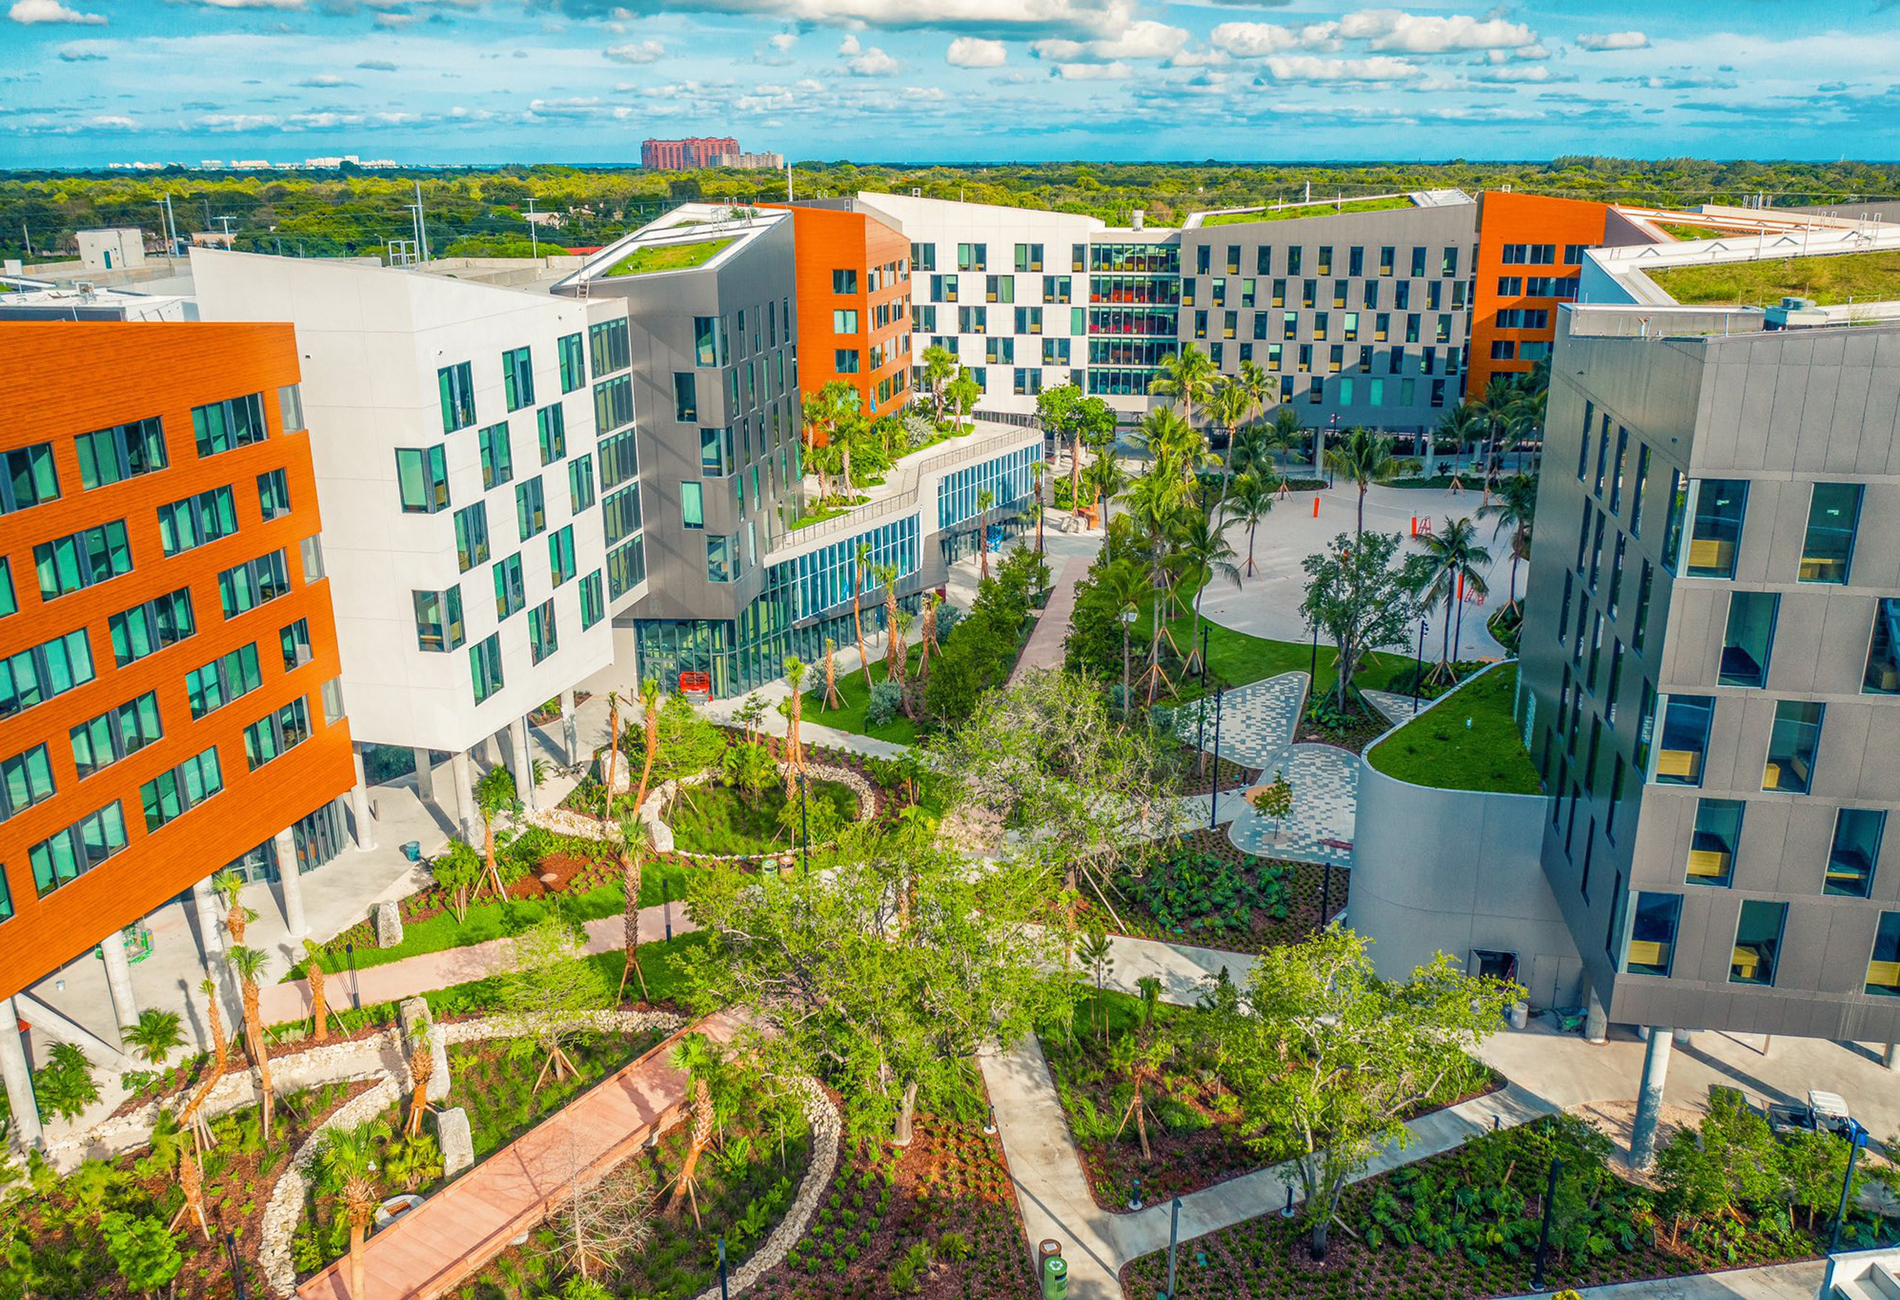 Aerial view of Lakeside dormitories on the University of Miami.